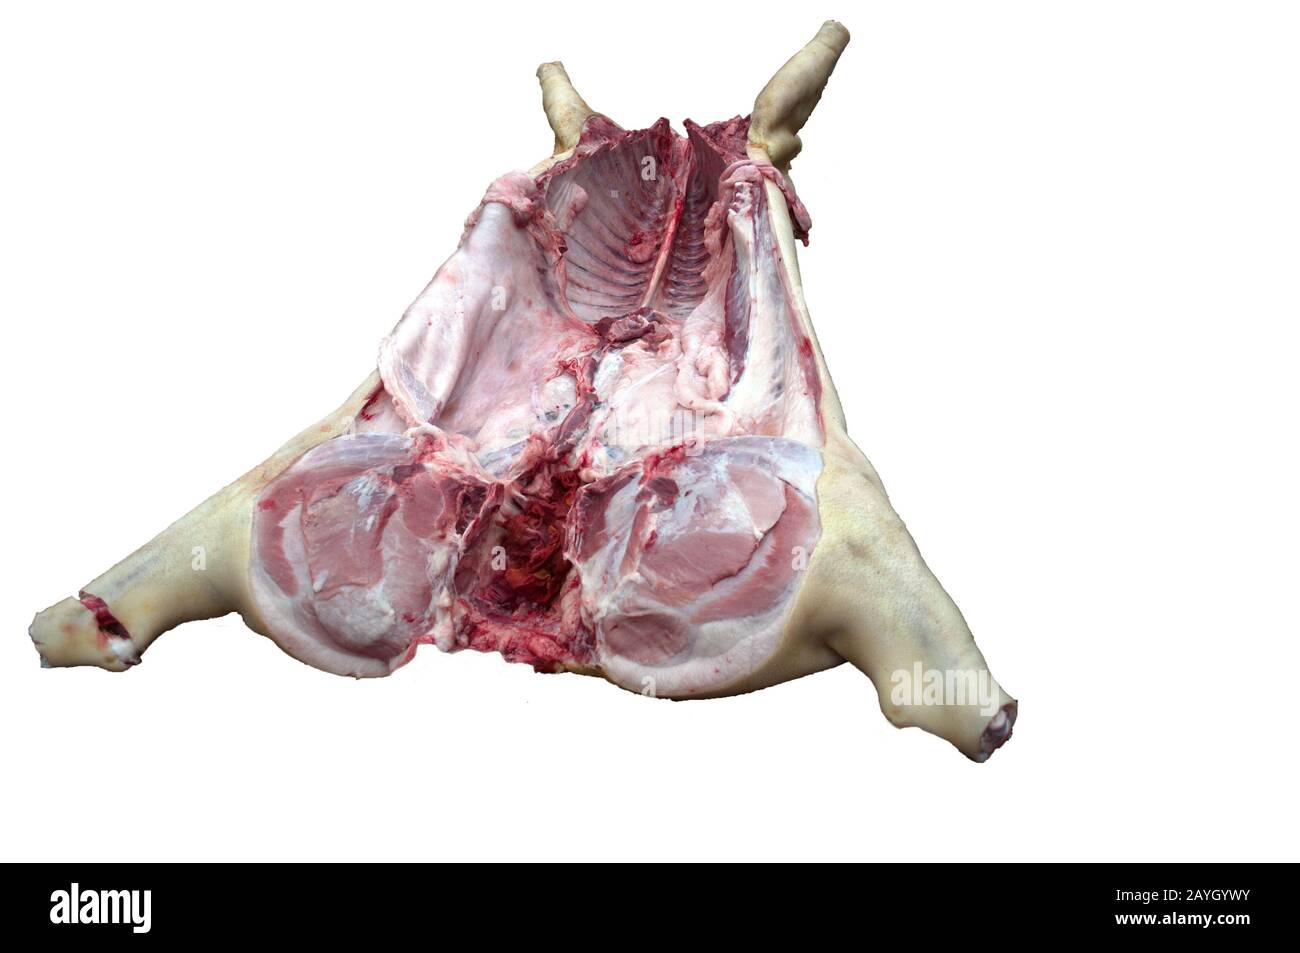 The headless pig carcass is ready to be dismantled by the butcher. Photographed from the tail. Isolate on a white background. Stock Photo